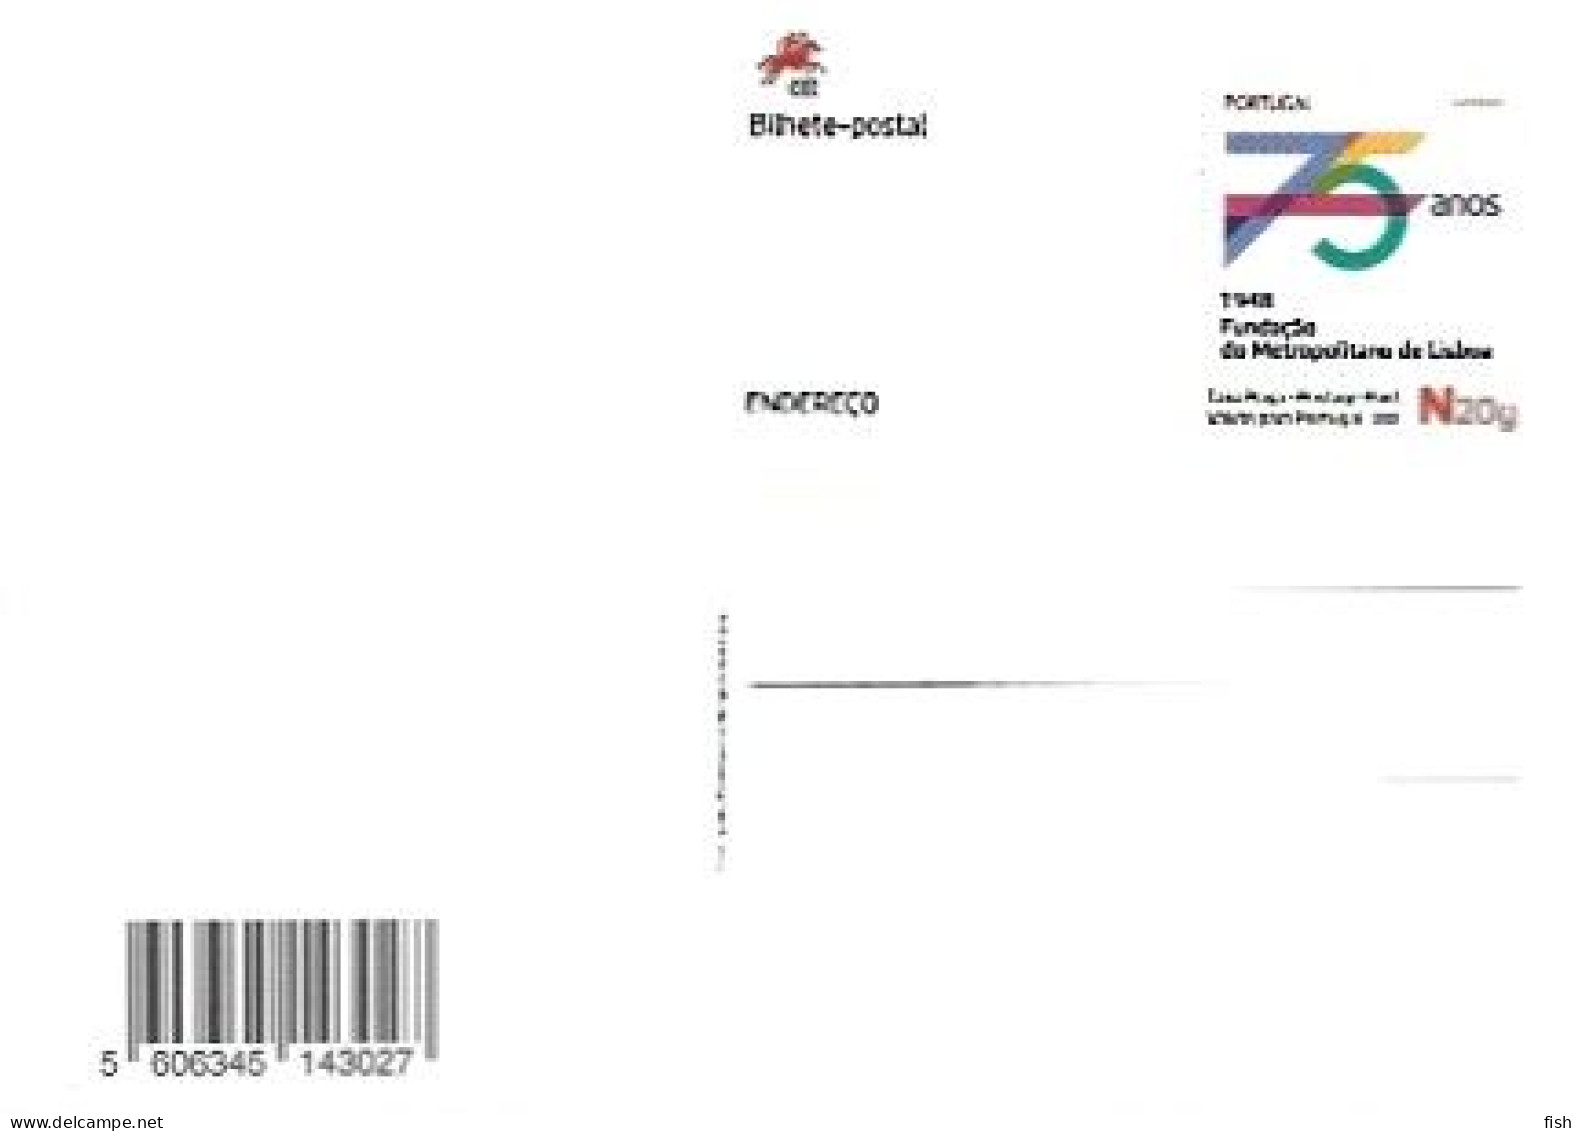 Portugal ** & Postal Stationery, 75 Years Of The Foundation Of The Metropolitan Of Lisbon 1948-2023 (799799) - Inaugurations